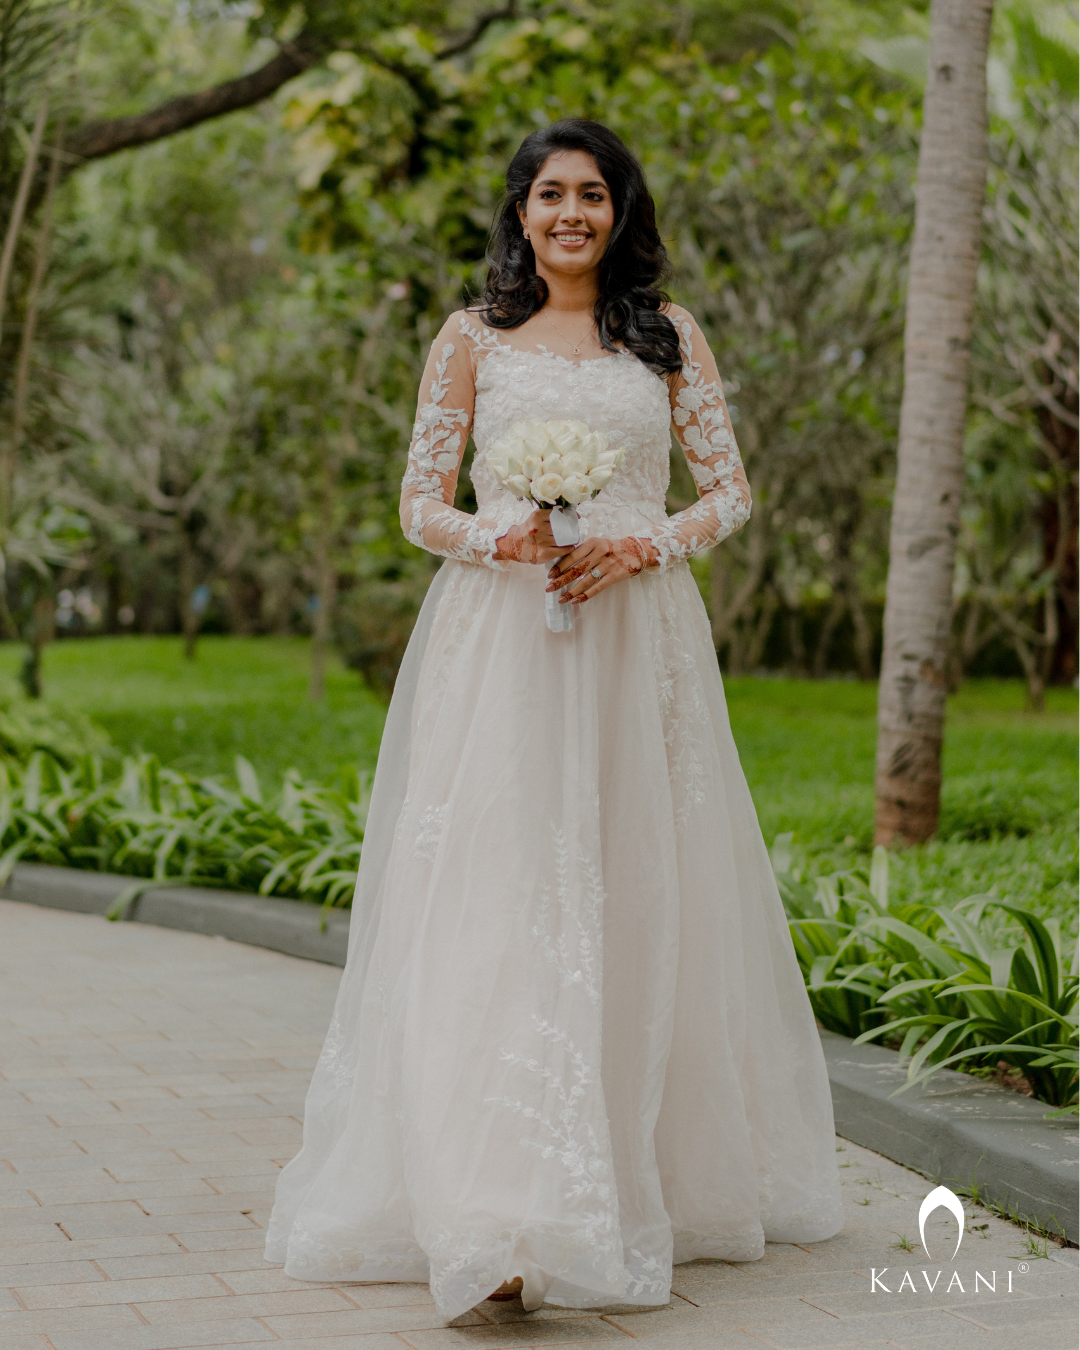 Kerala Christian Bridal Gown and Bokeh | Gallery | Fancy wedding dresses,  Christian wedding gowns, Christian wedding sarees